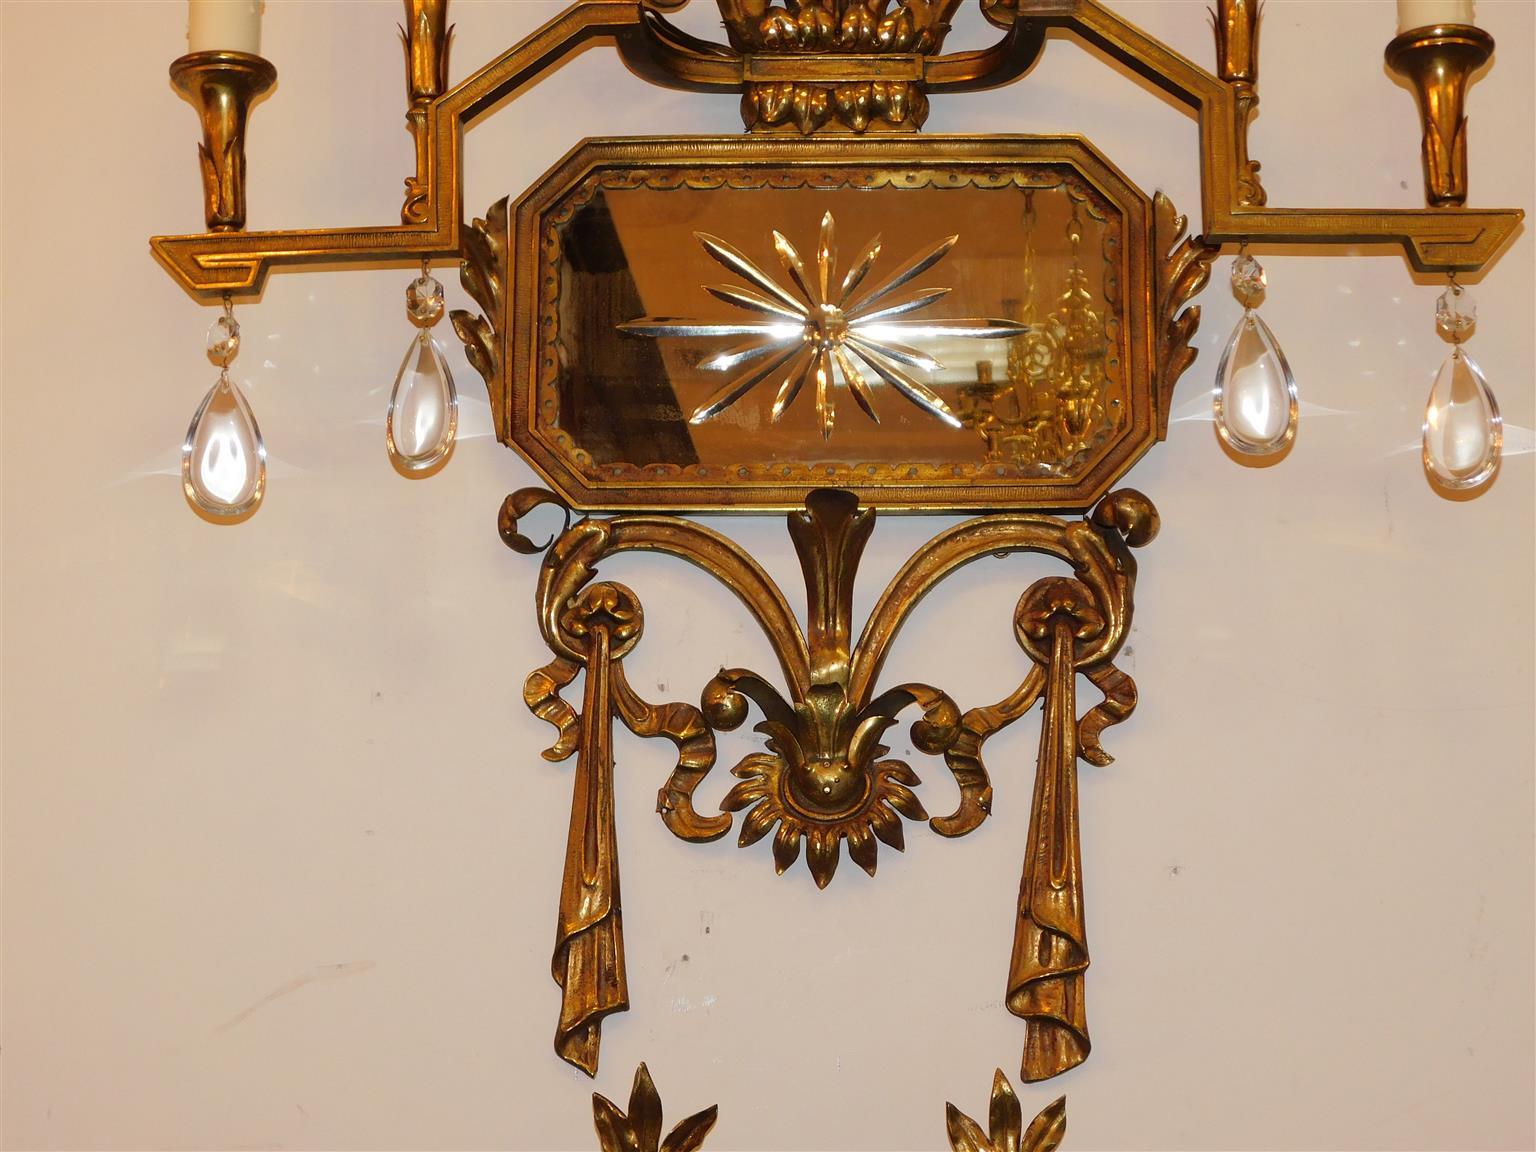 Pair of American Gilt Bronze & Star Mirrored Wall Sconces, Caldwell & Co. C 1870 For Sale 3